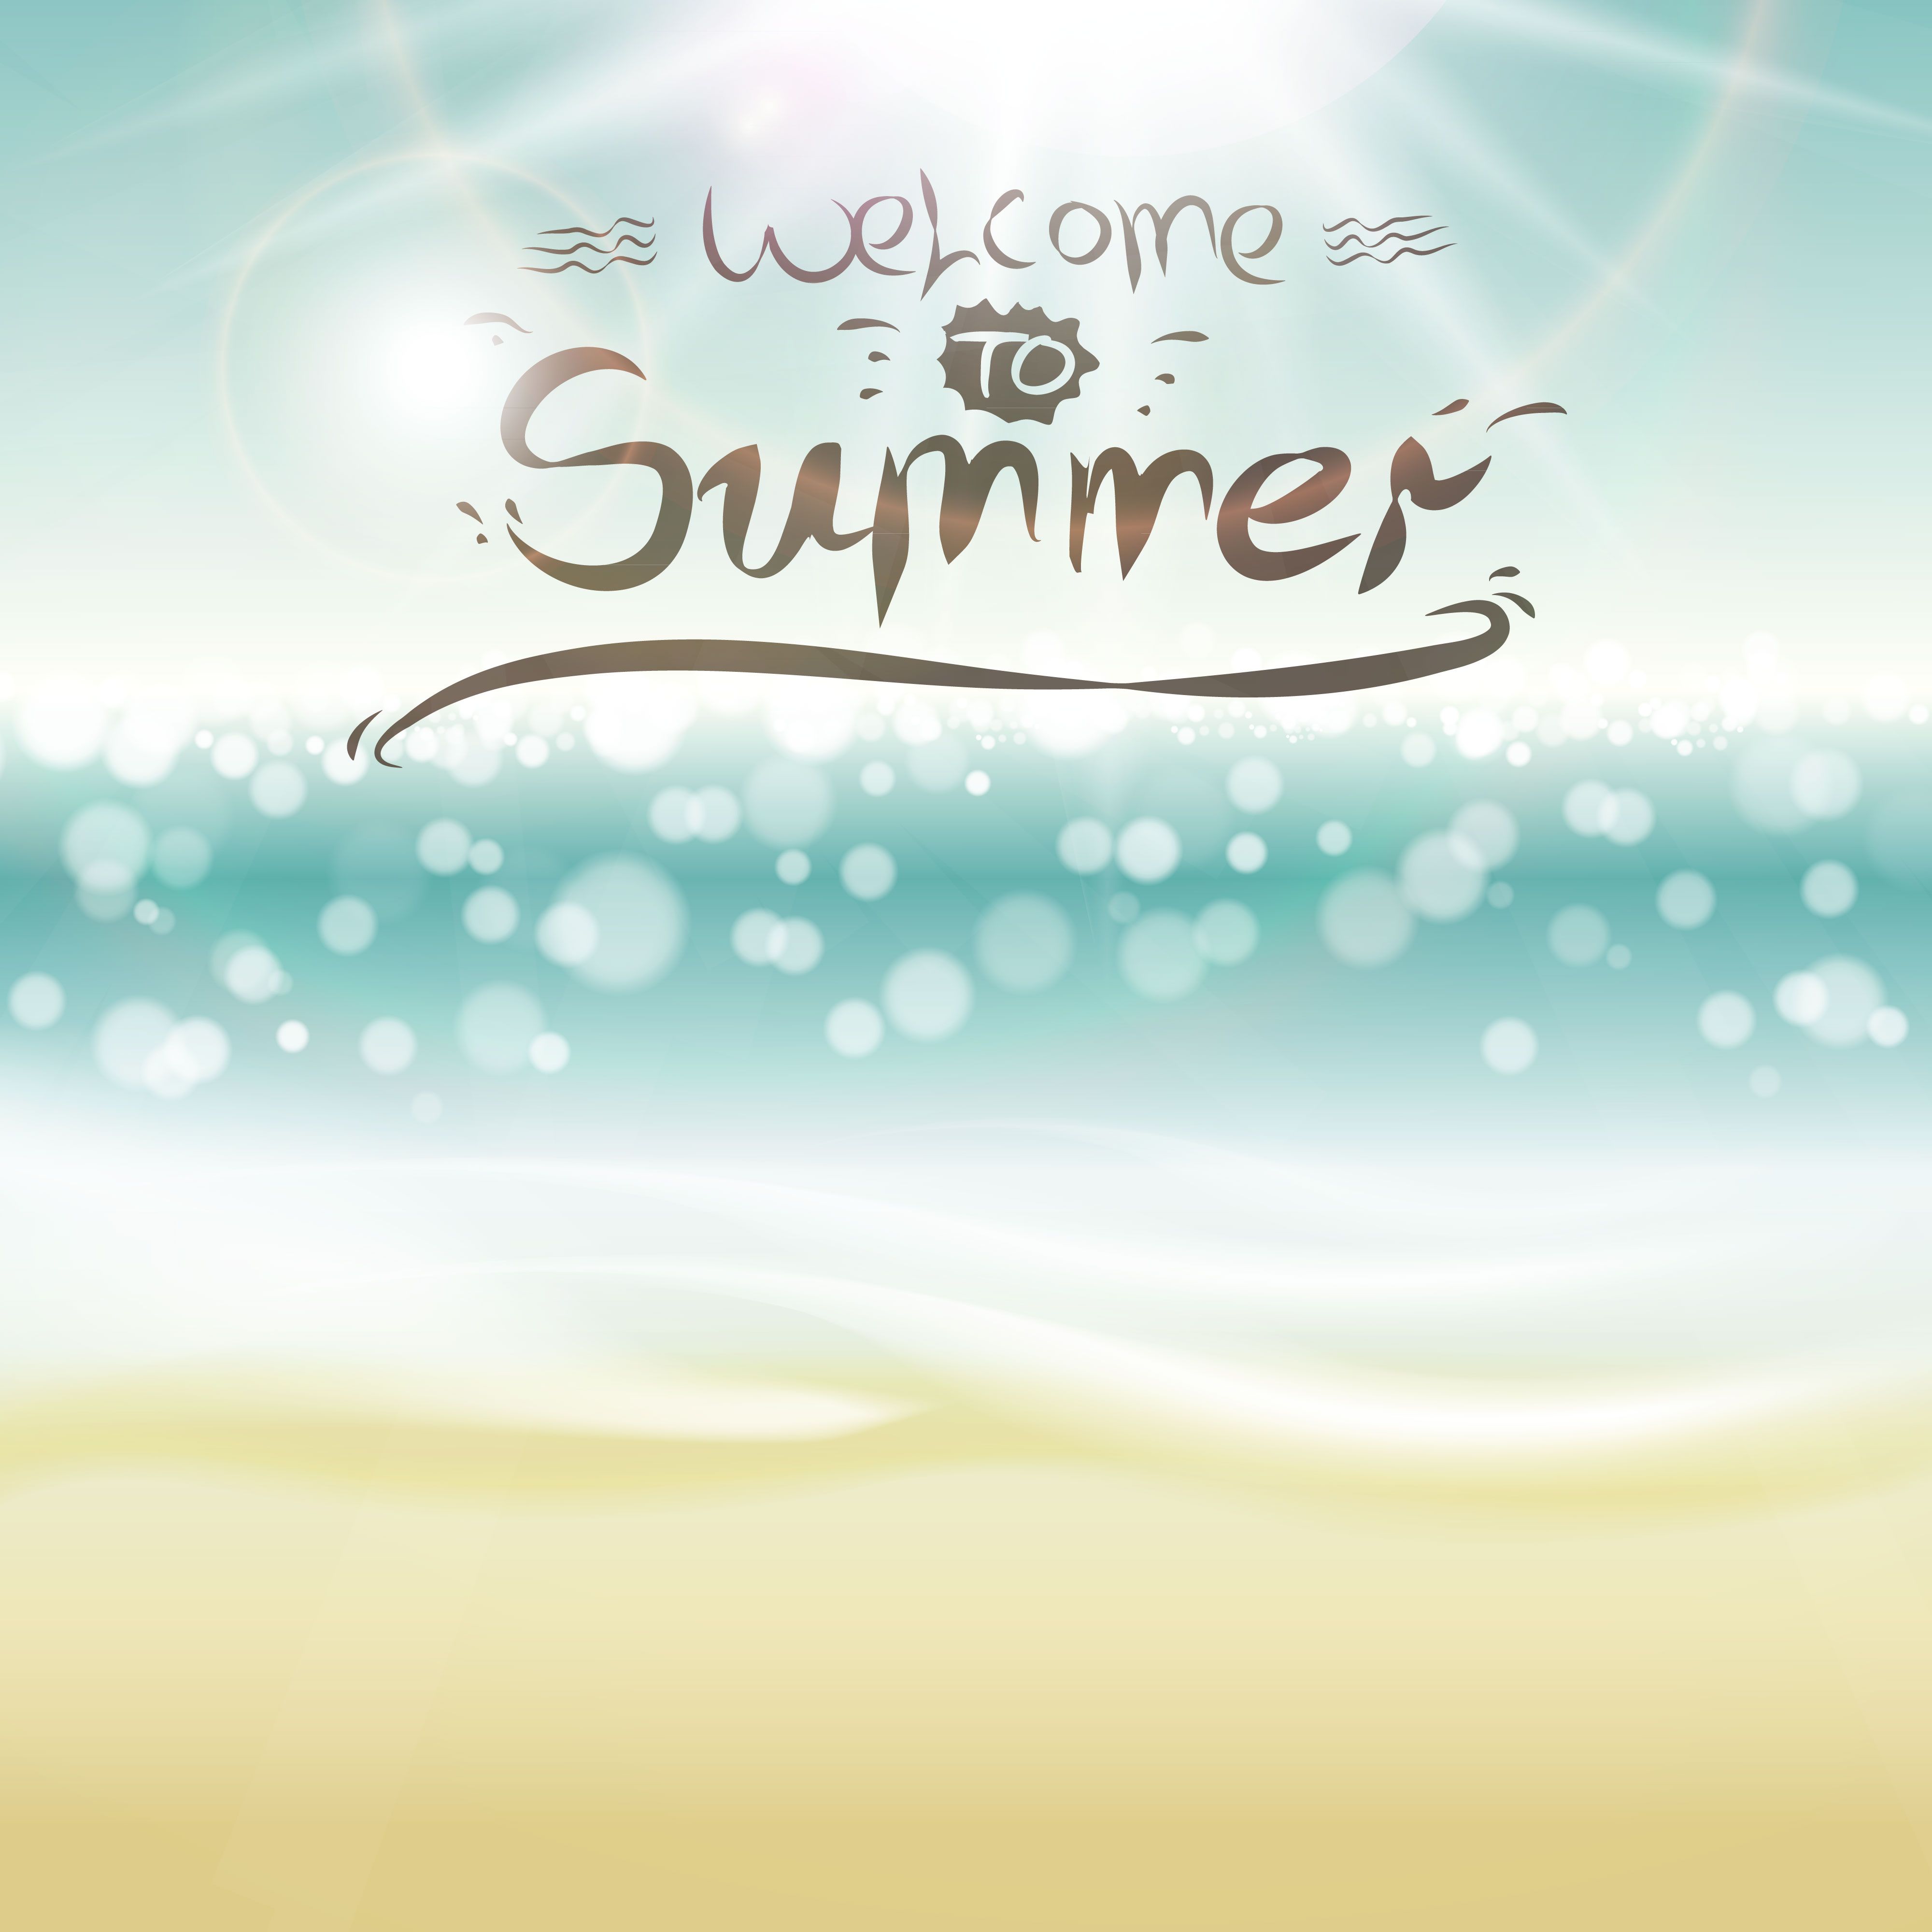 Summer Backgrounds with light vector dot 01 - Vector Background